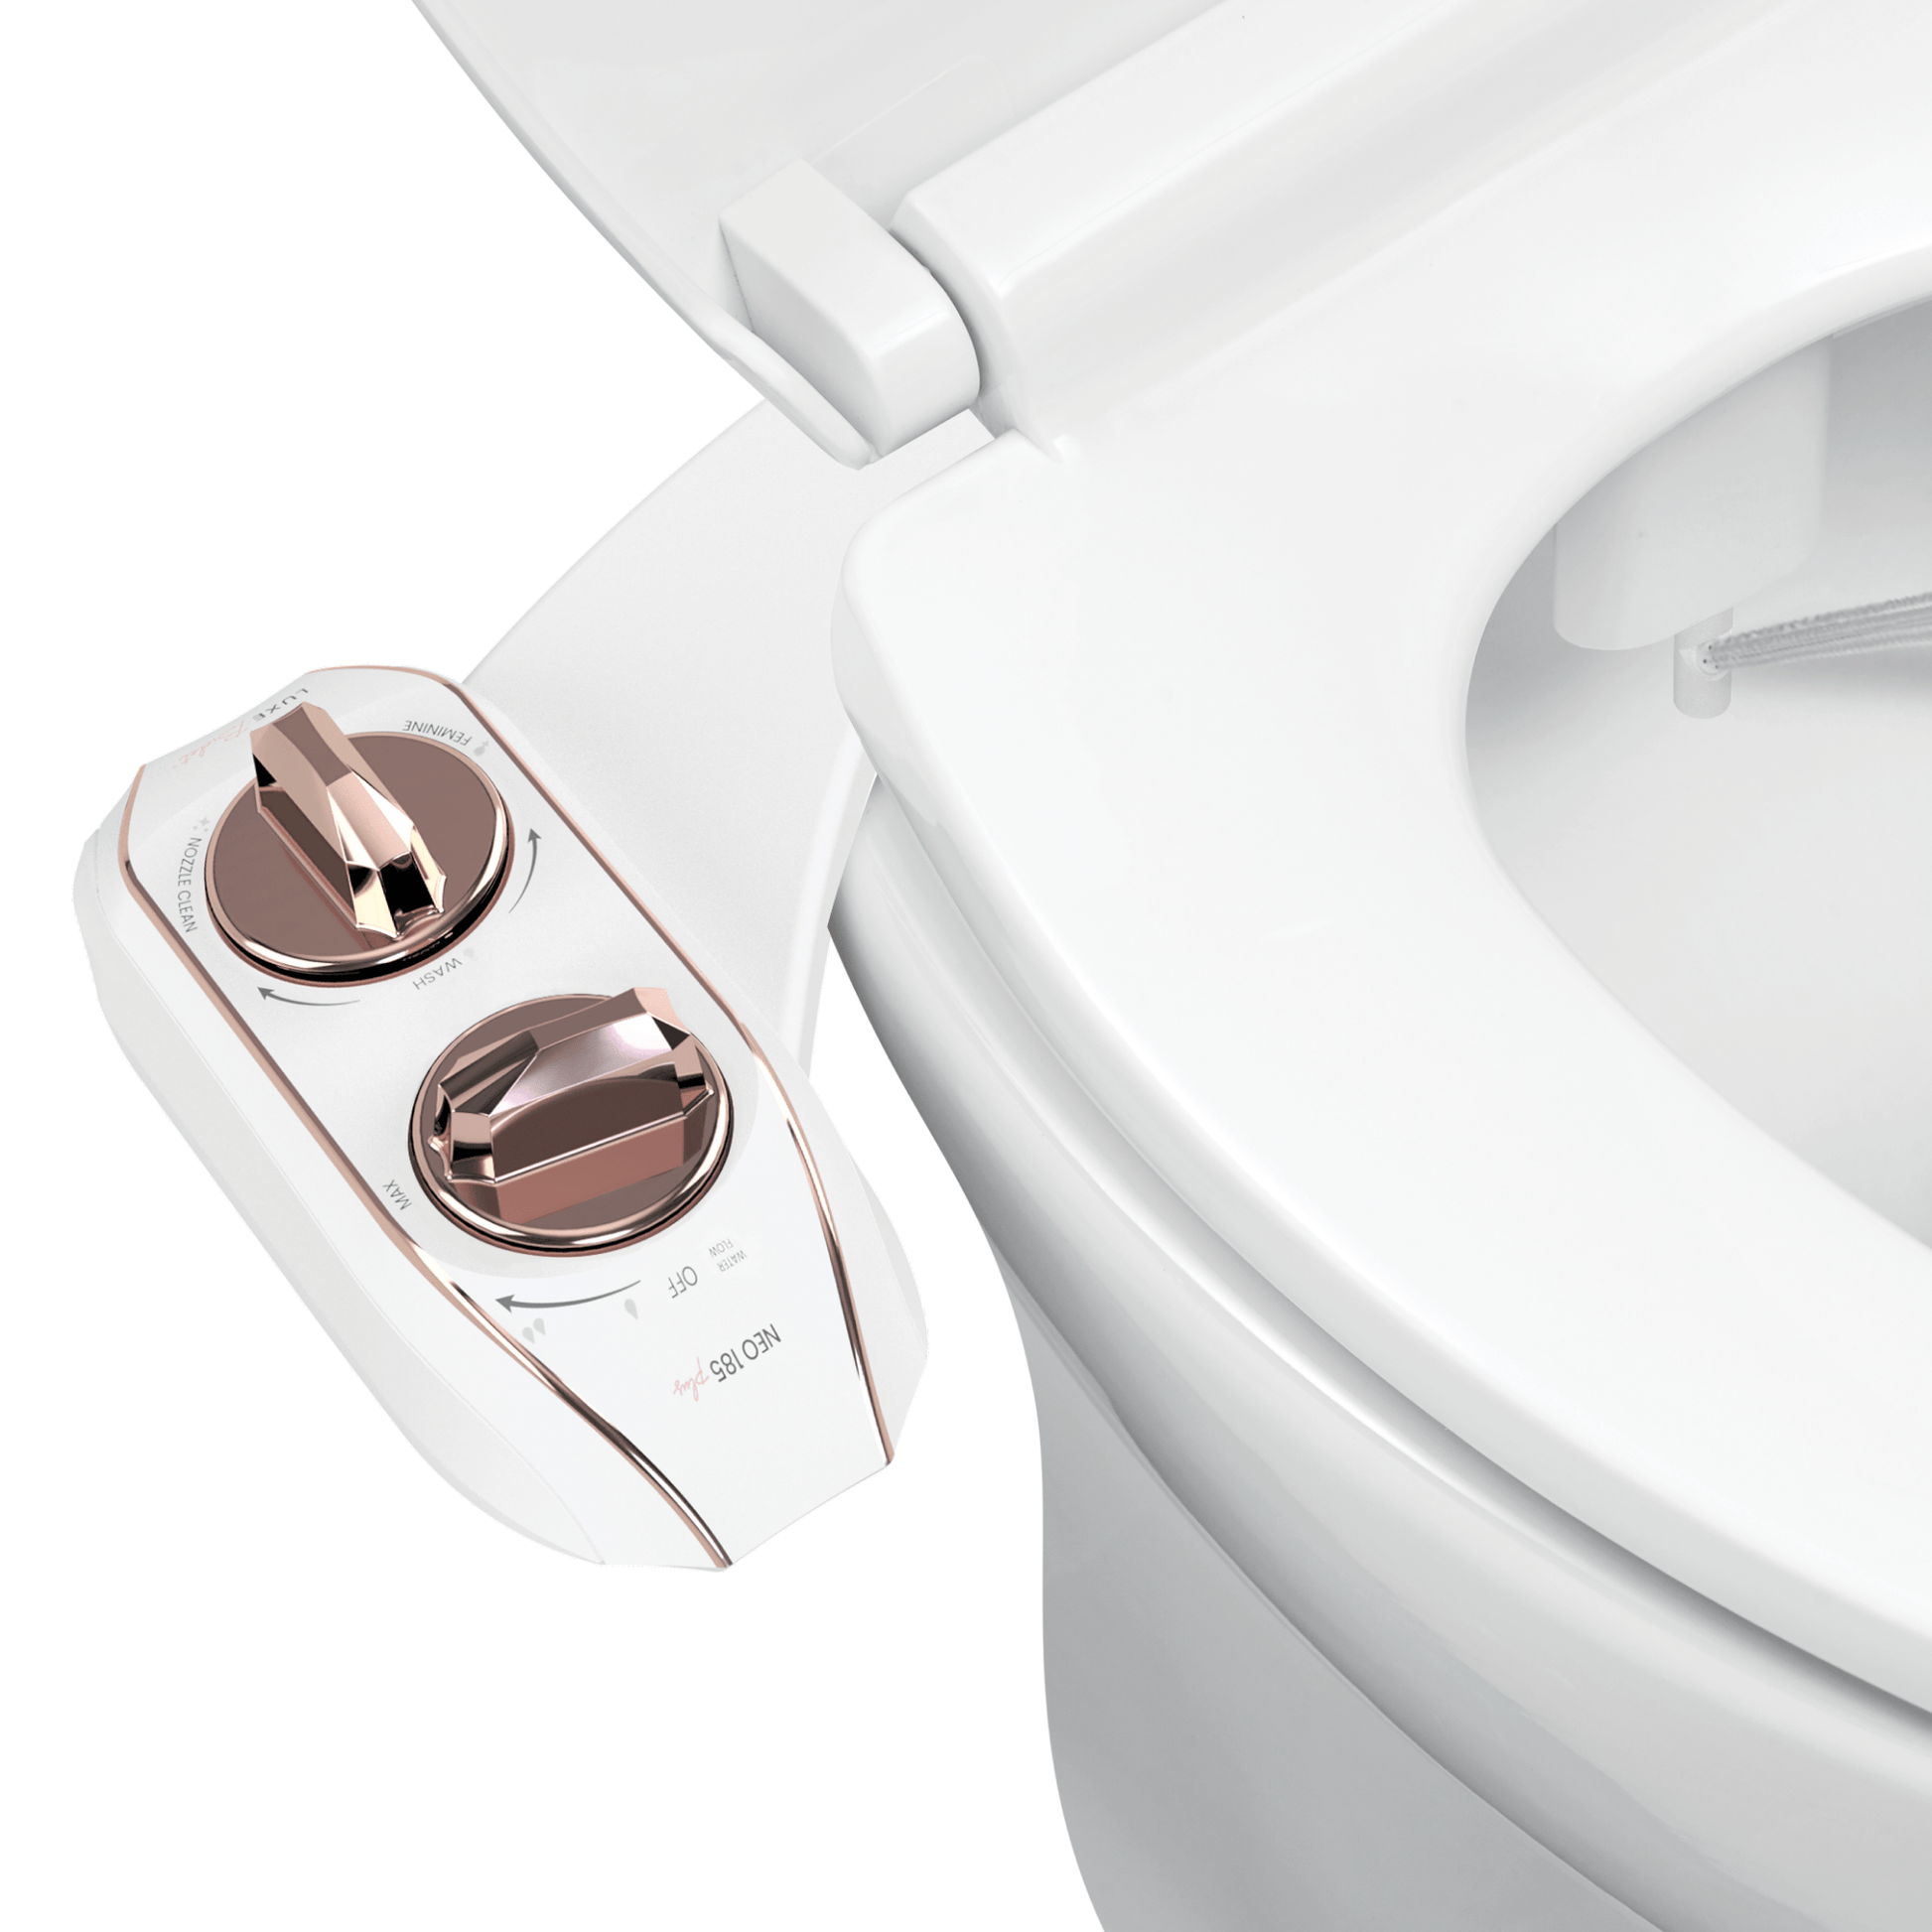 NEO 185 Plus - HOT! The Most Popular #1 Solution To #2 – LUXE Bidet